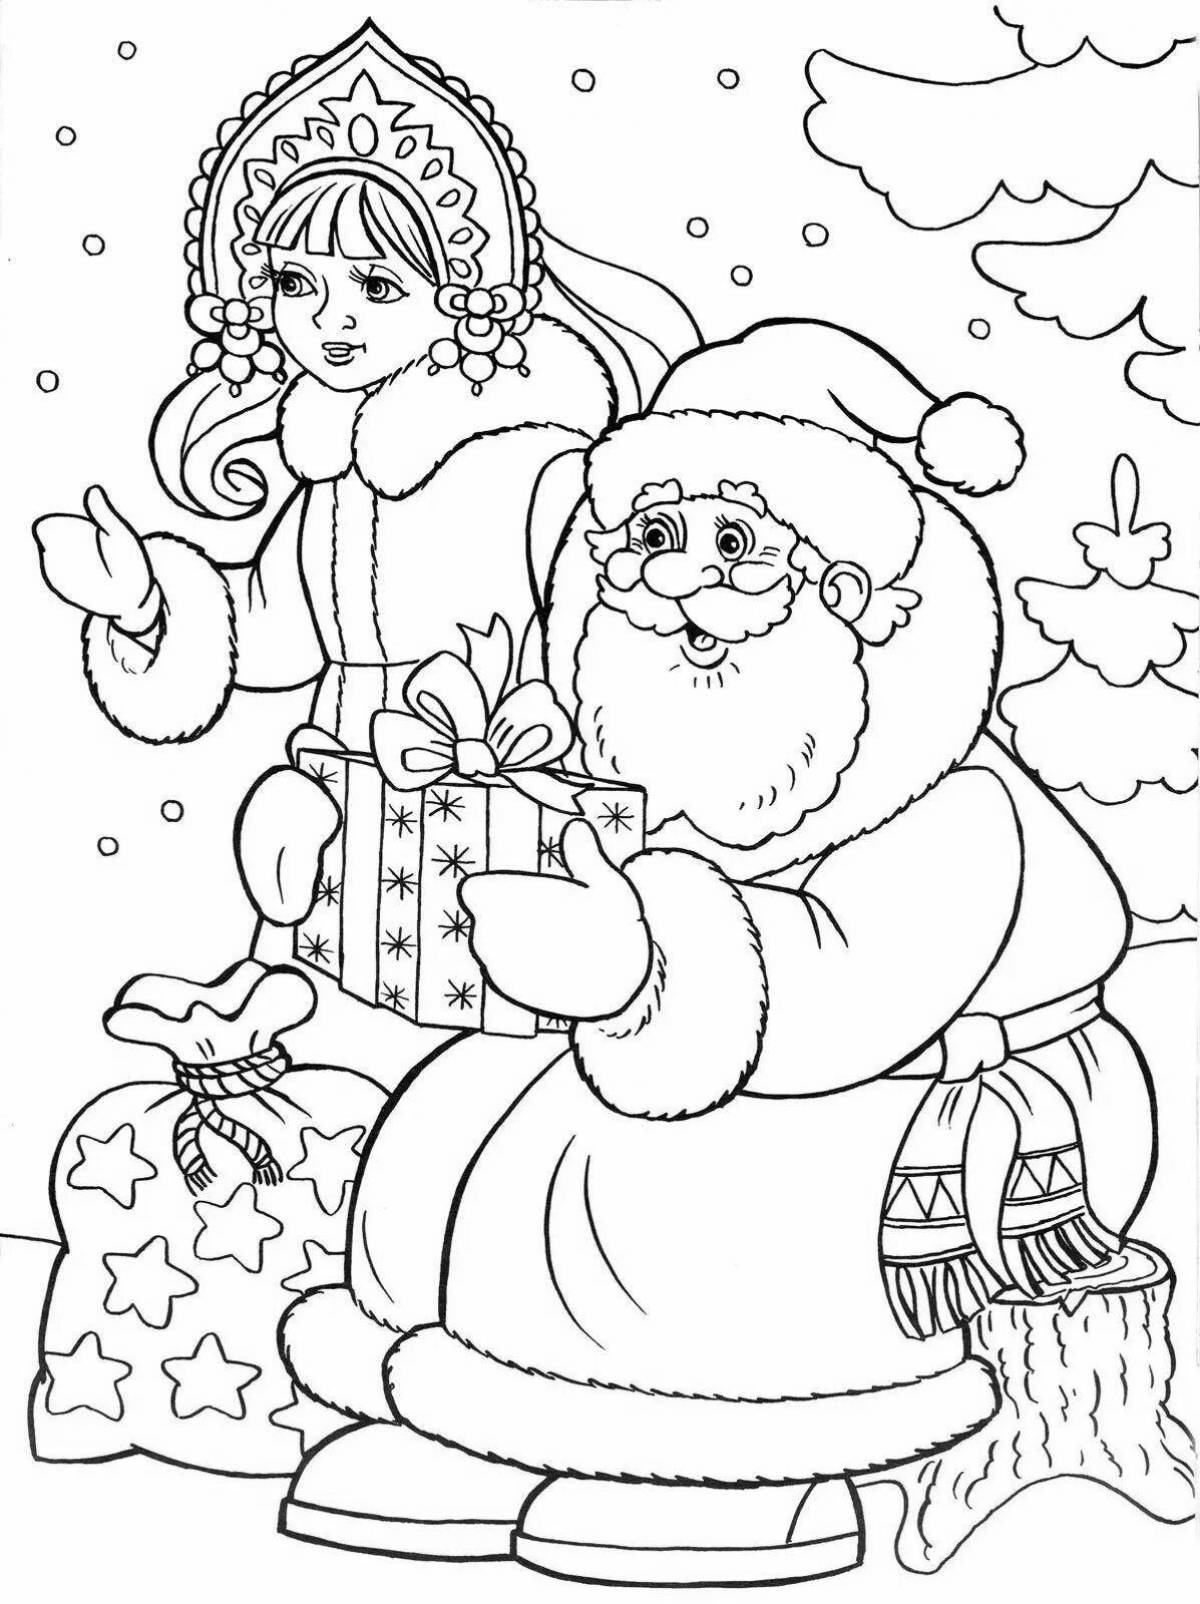 A funny snow maiden coloring book for kids